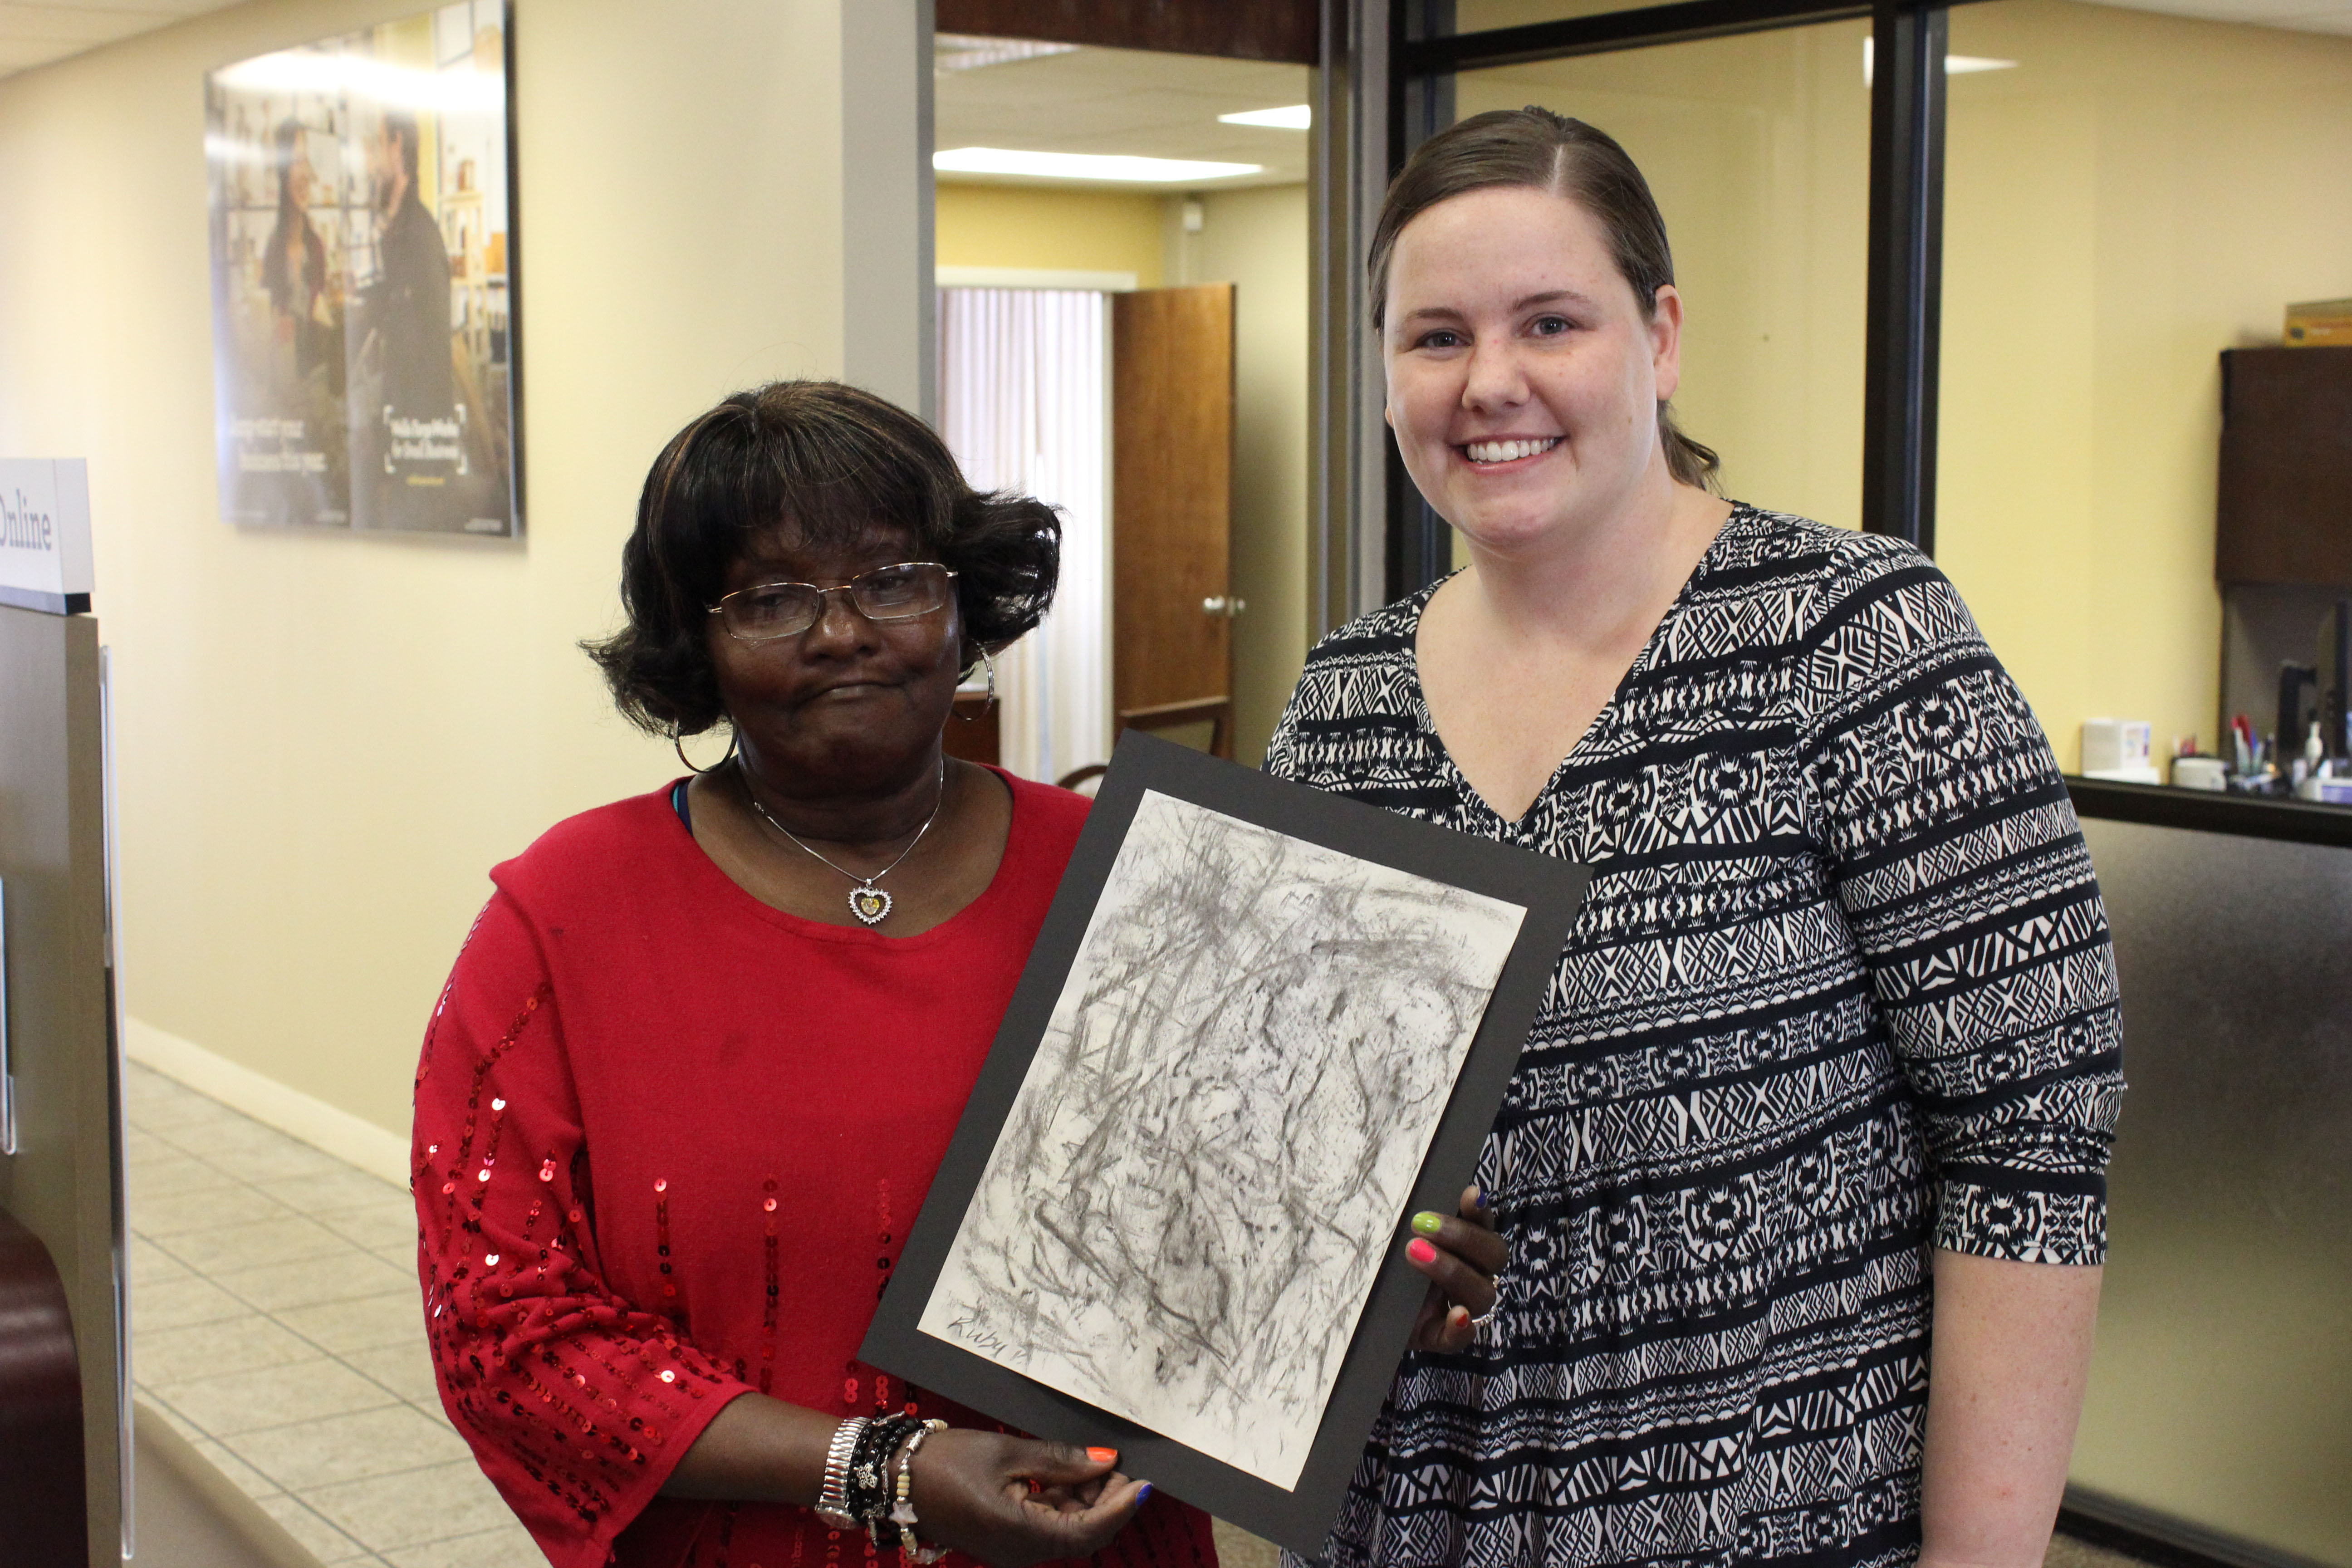 Sunland resident Ruby P., left, proudly displays her willow charcoal rubbing with a Wells Fargo employee.